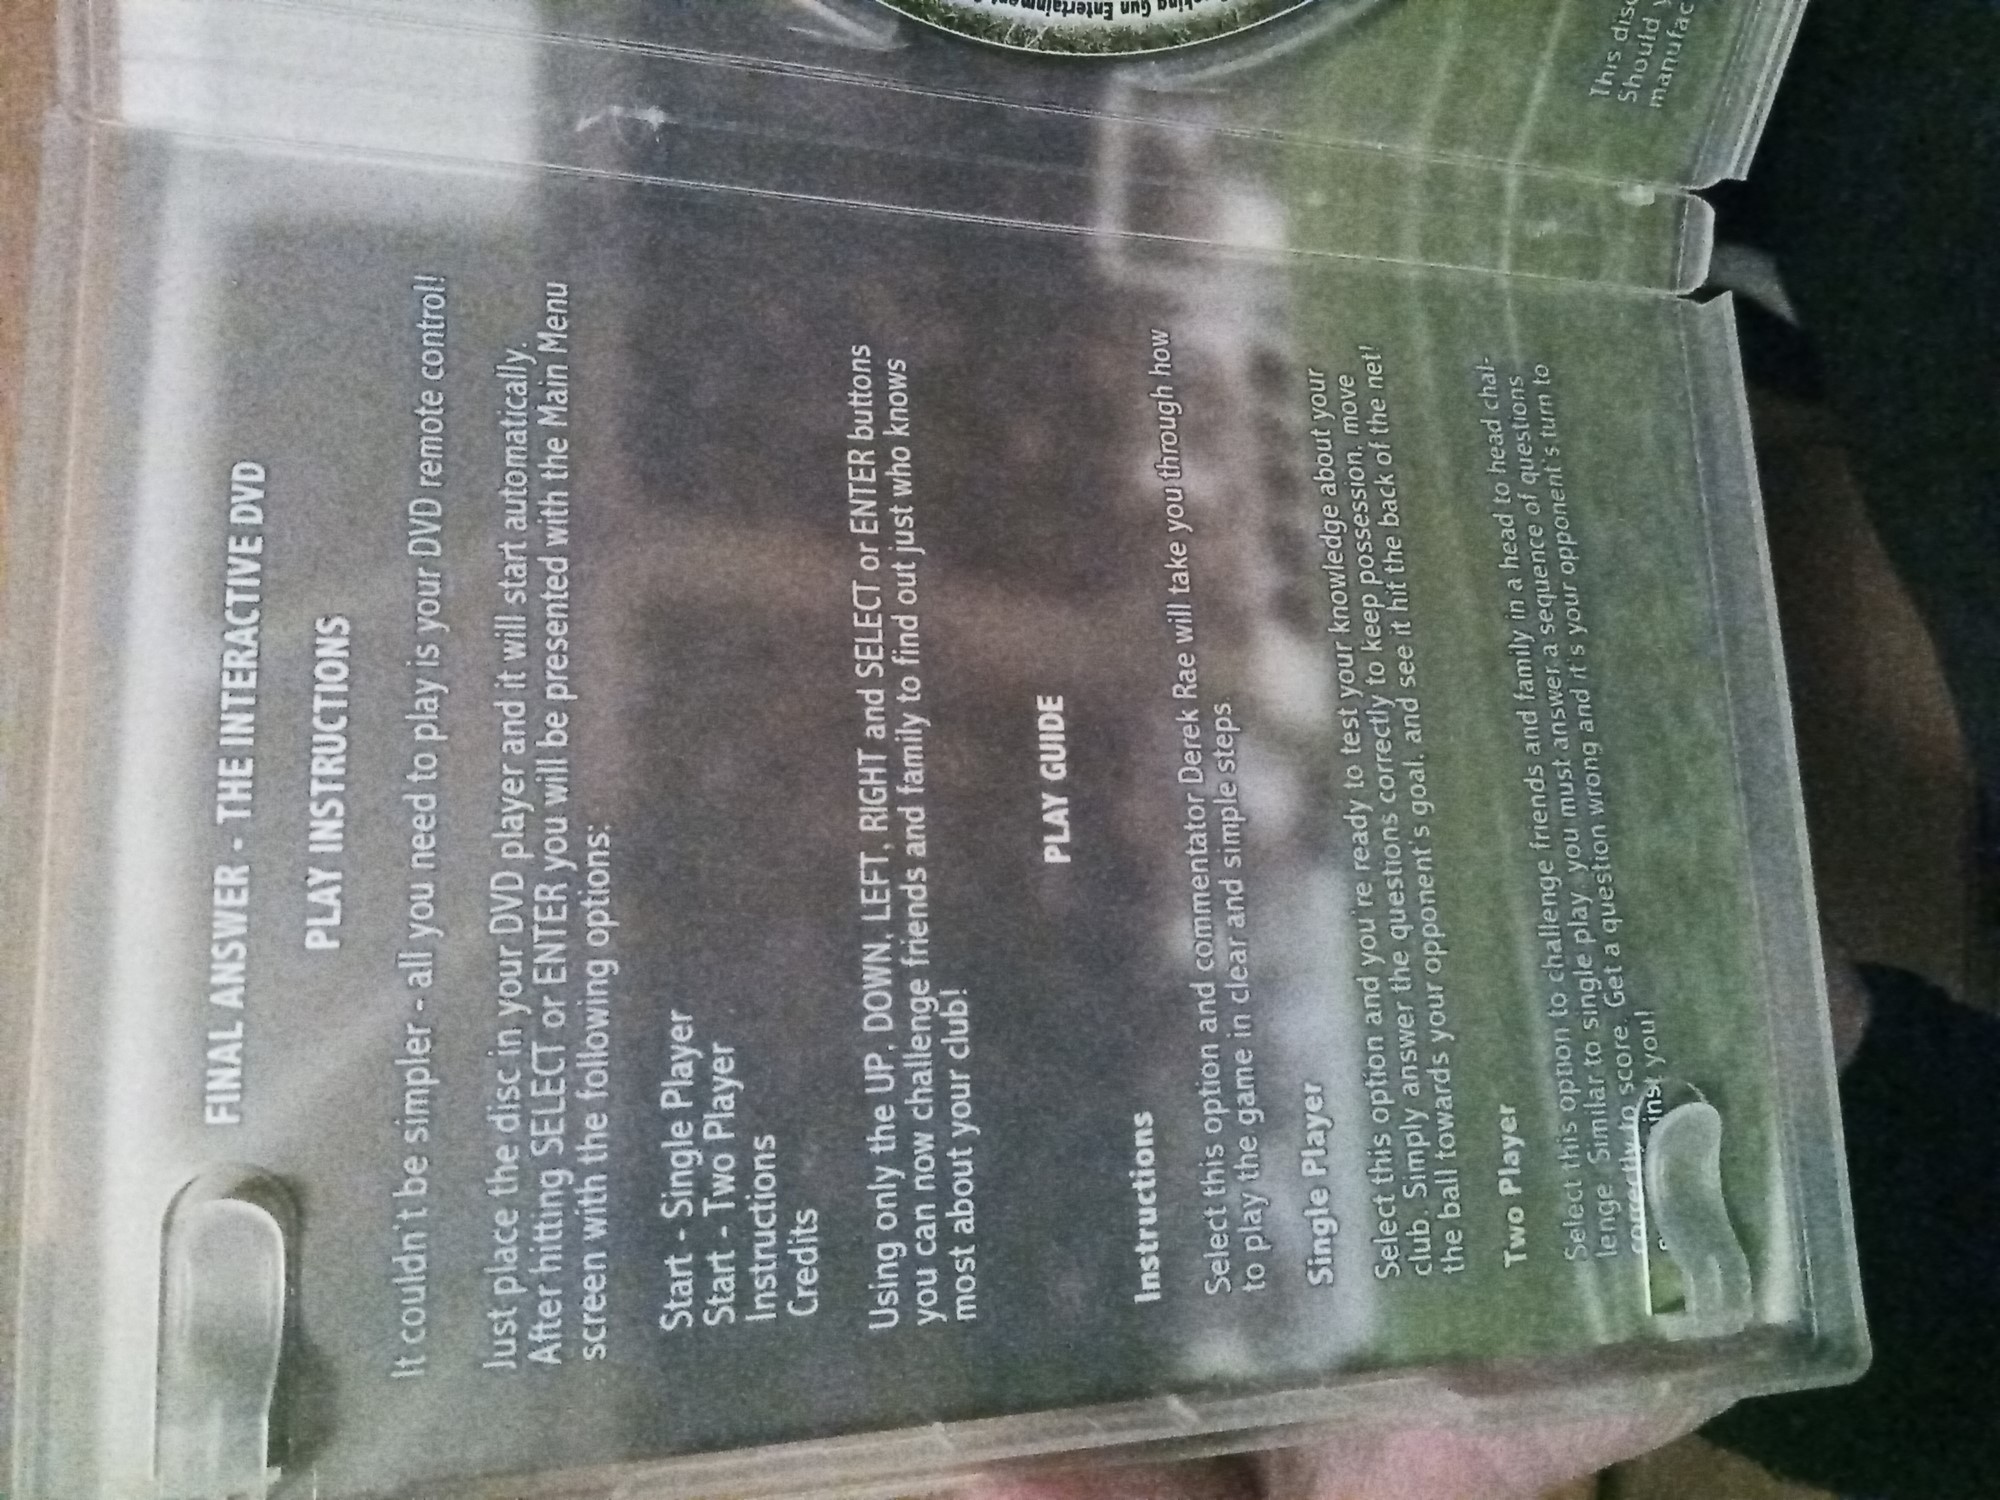 DVD case inside cover. Features basic instructions on how to play using the directional buttons on your DVD remote.